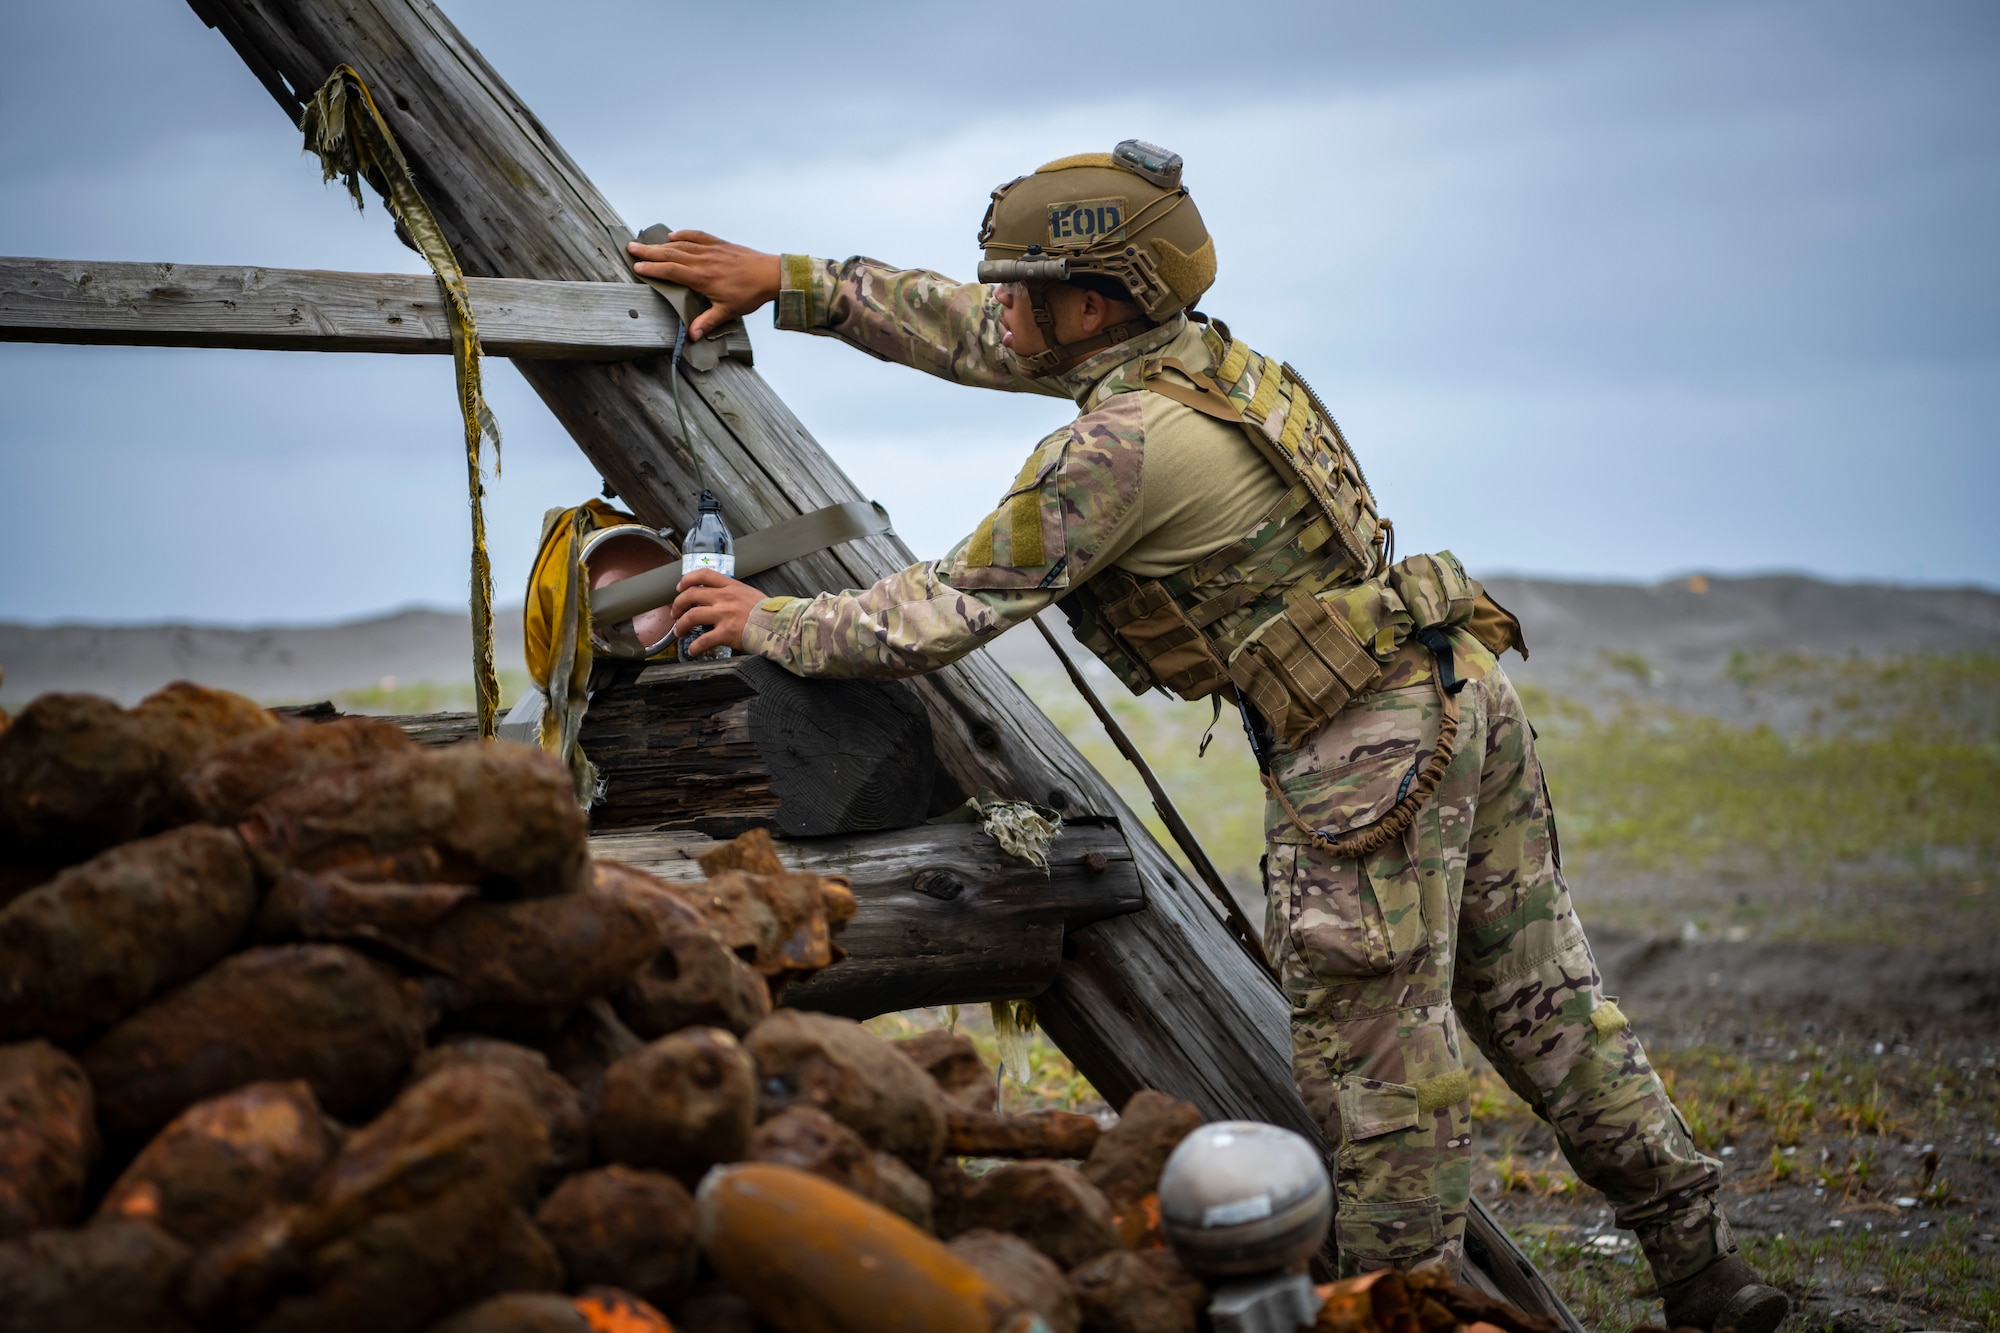 U.S. military member in tactical gear plants an explosive on a wooden post.